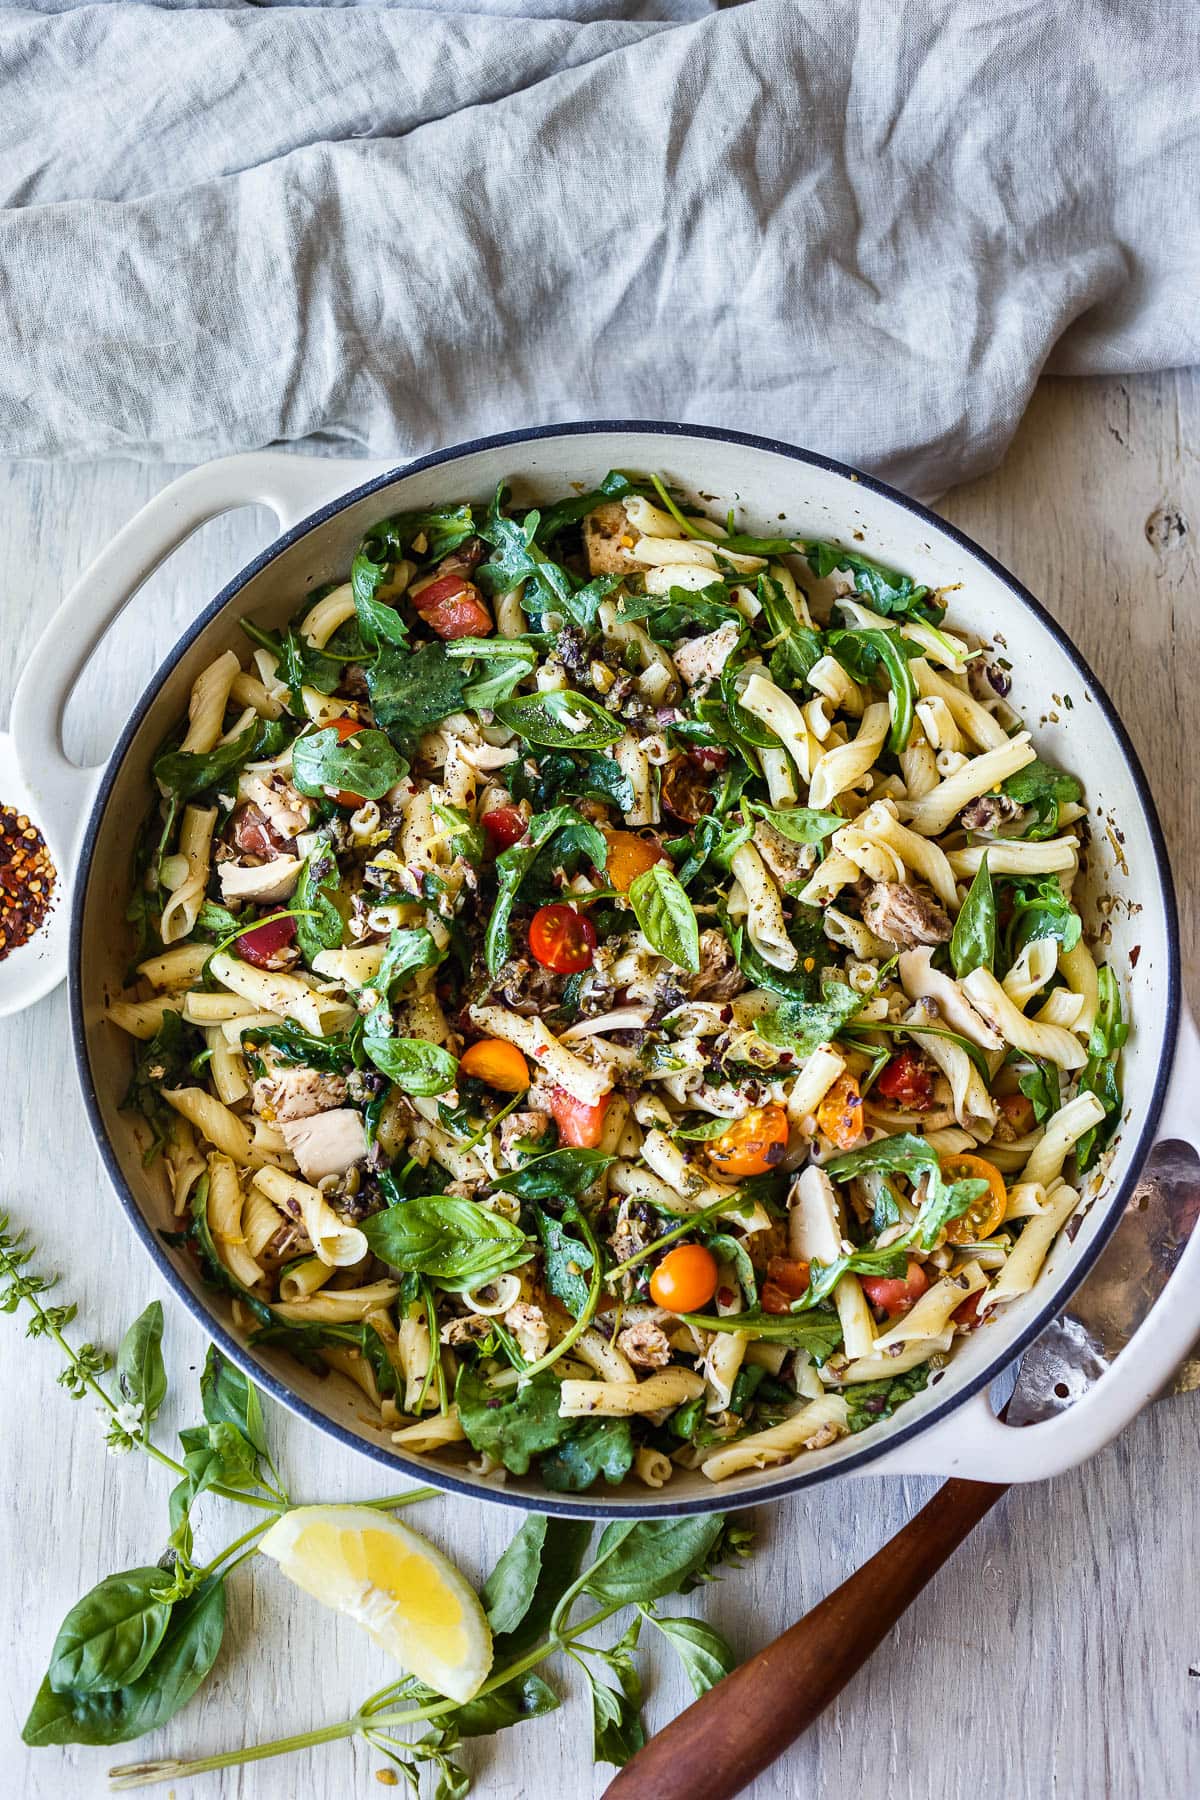 Tuna Pasta with Olive Tapenade & Fresh Tomatoes is a super fast, fresh pasta dish that is full of bright clean flavors.  An easy dinner ready in 30 minutes!  Healthy, quick and delicious!